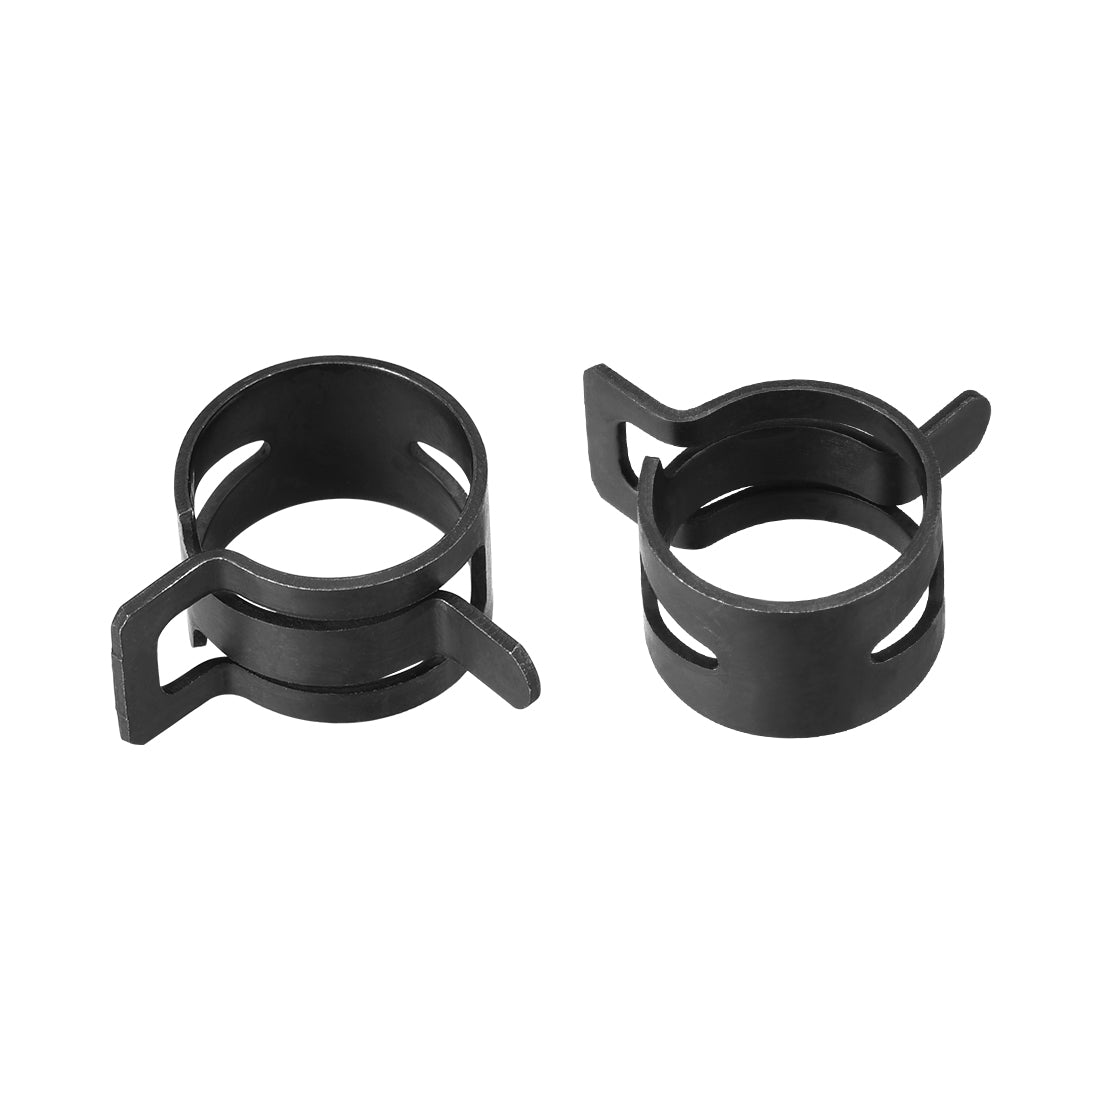 Uxcell Uxcell Steel Band Clamp 9mm for Fuel Line Silicone Hose Tube Spring Clips Clamp Black Manganese Steel 30Pcs